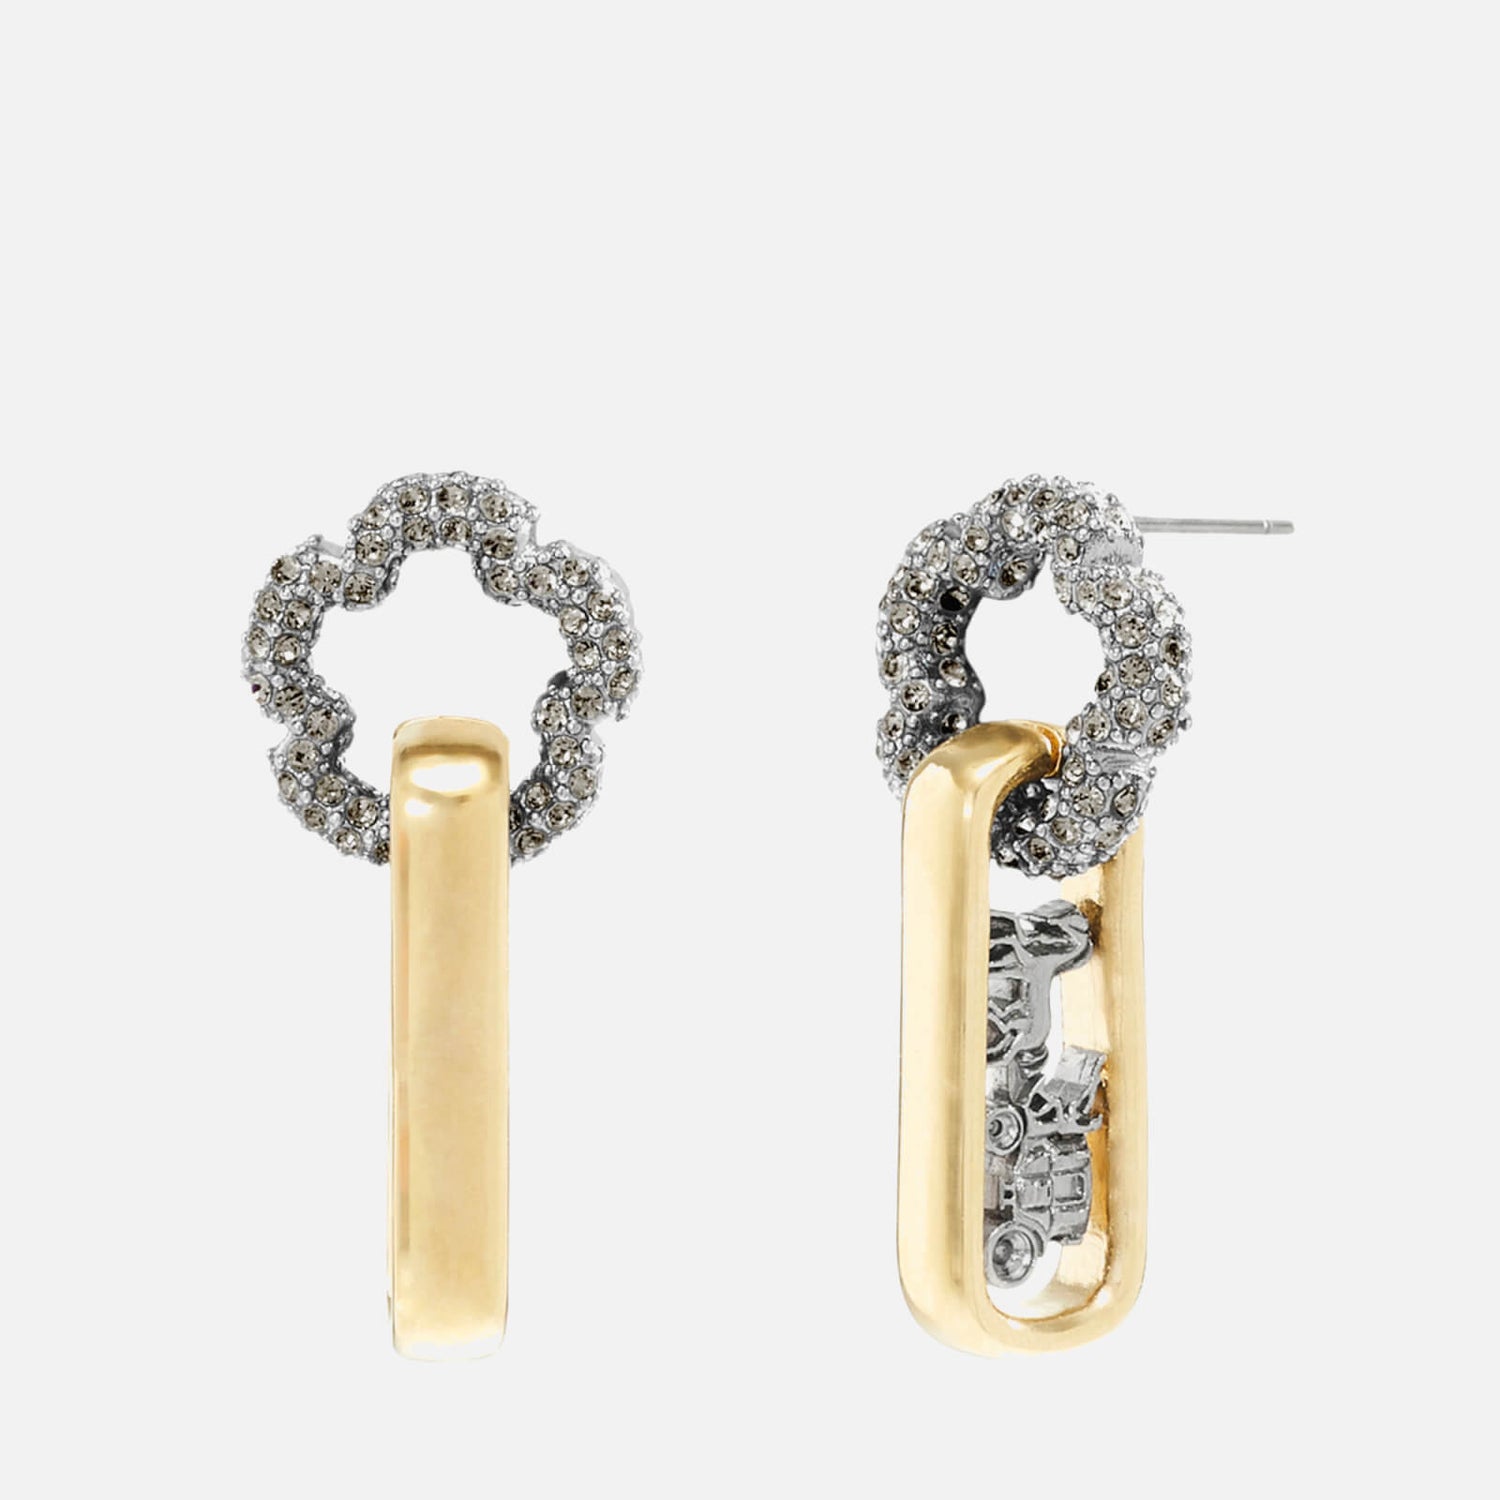 Coach Tearose Statement Gold and Silver-Tone Earrings